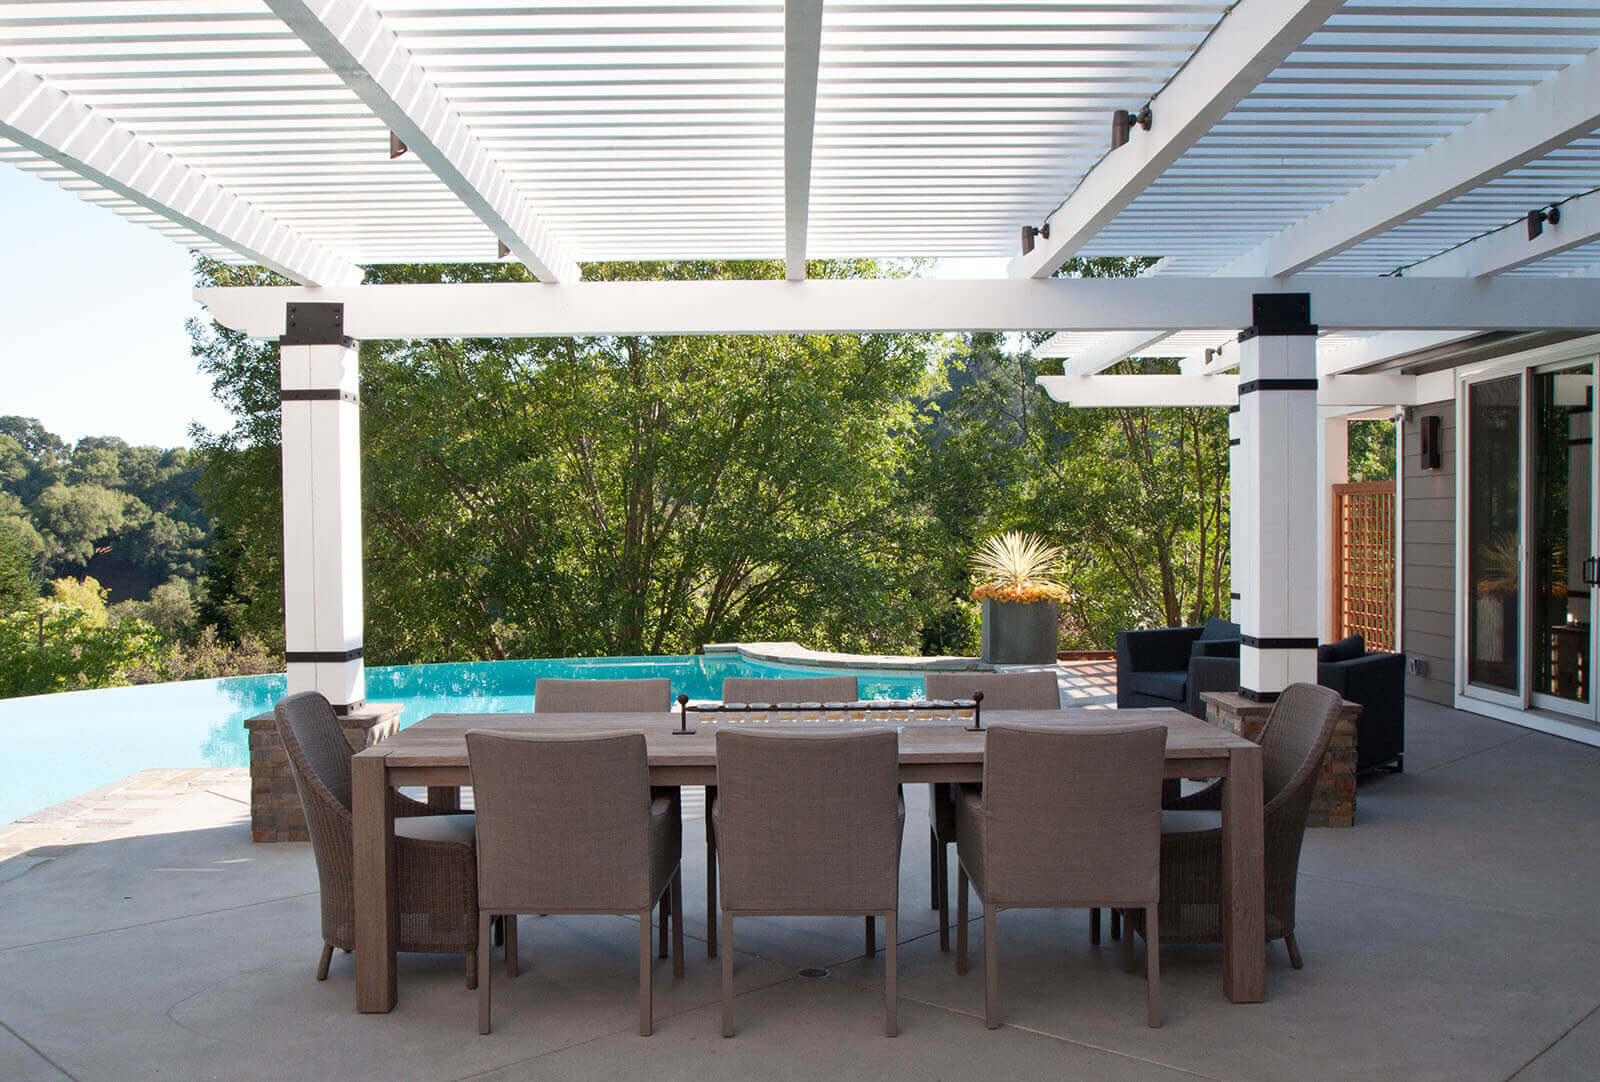 Outdoor dining area under a white pergola with black iron details overlooks curved infinity pool